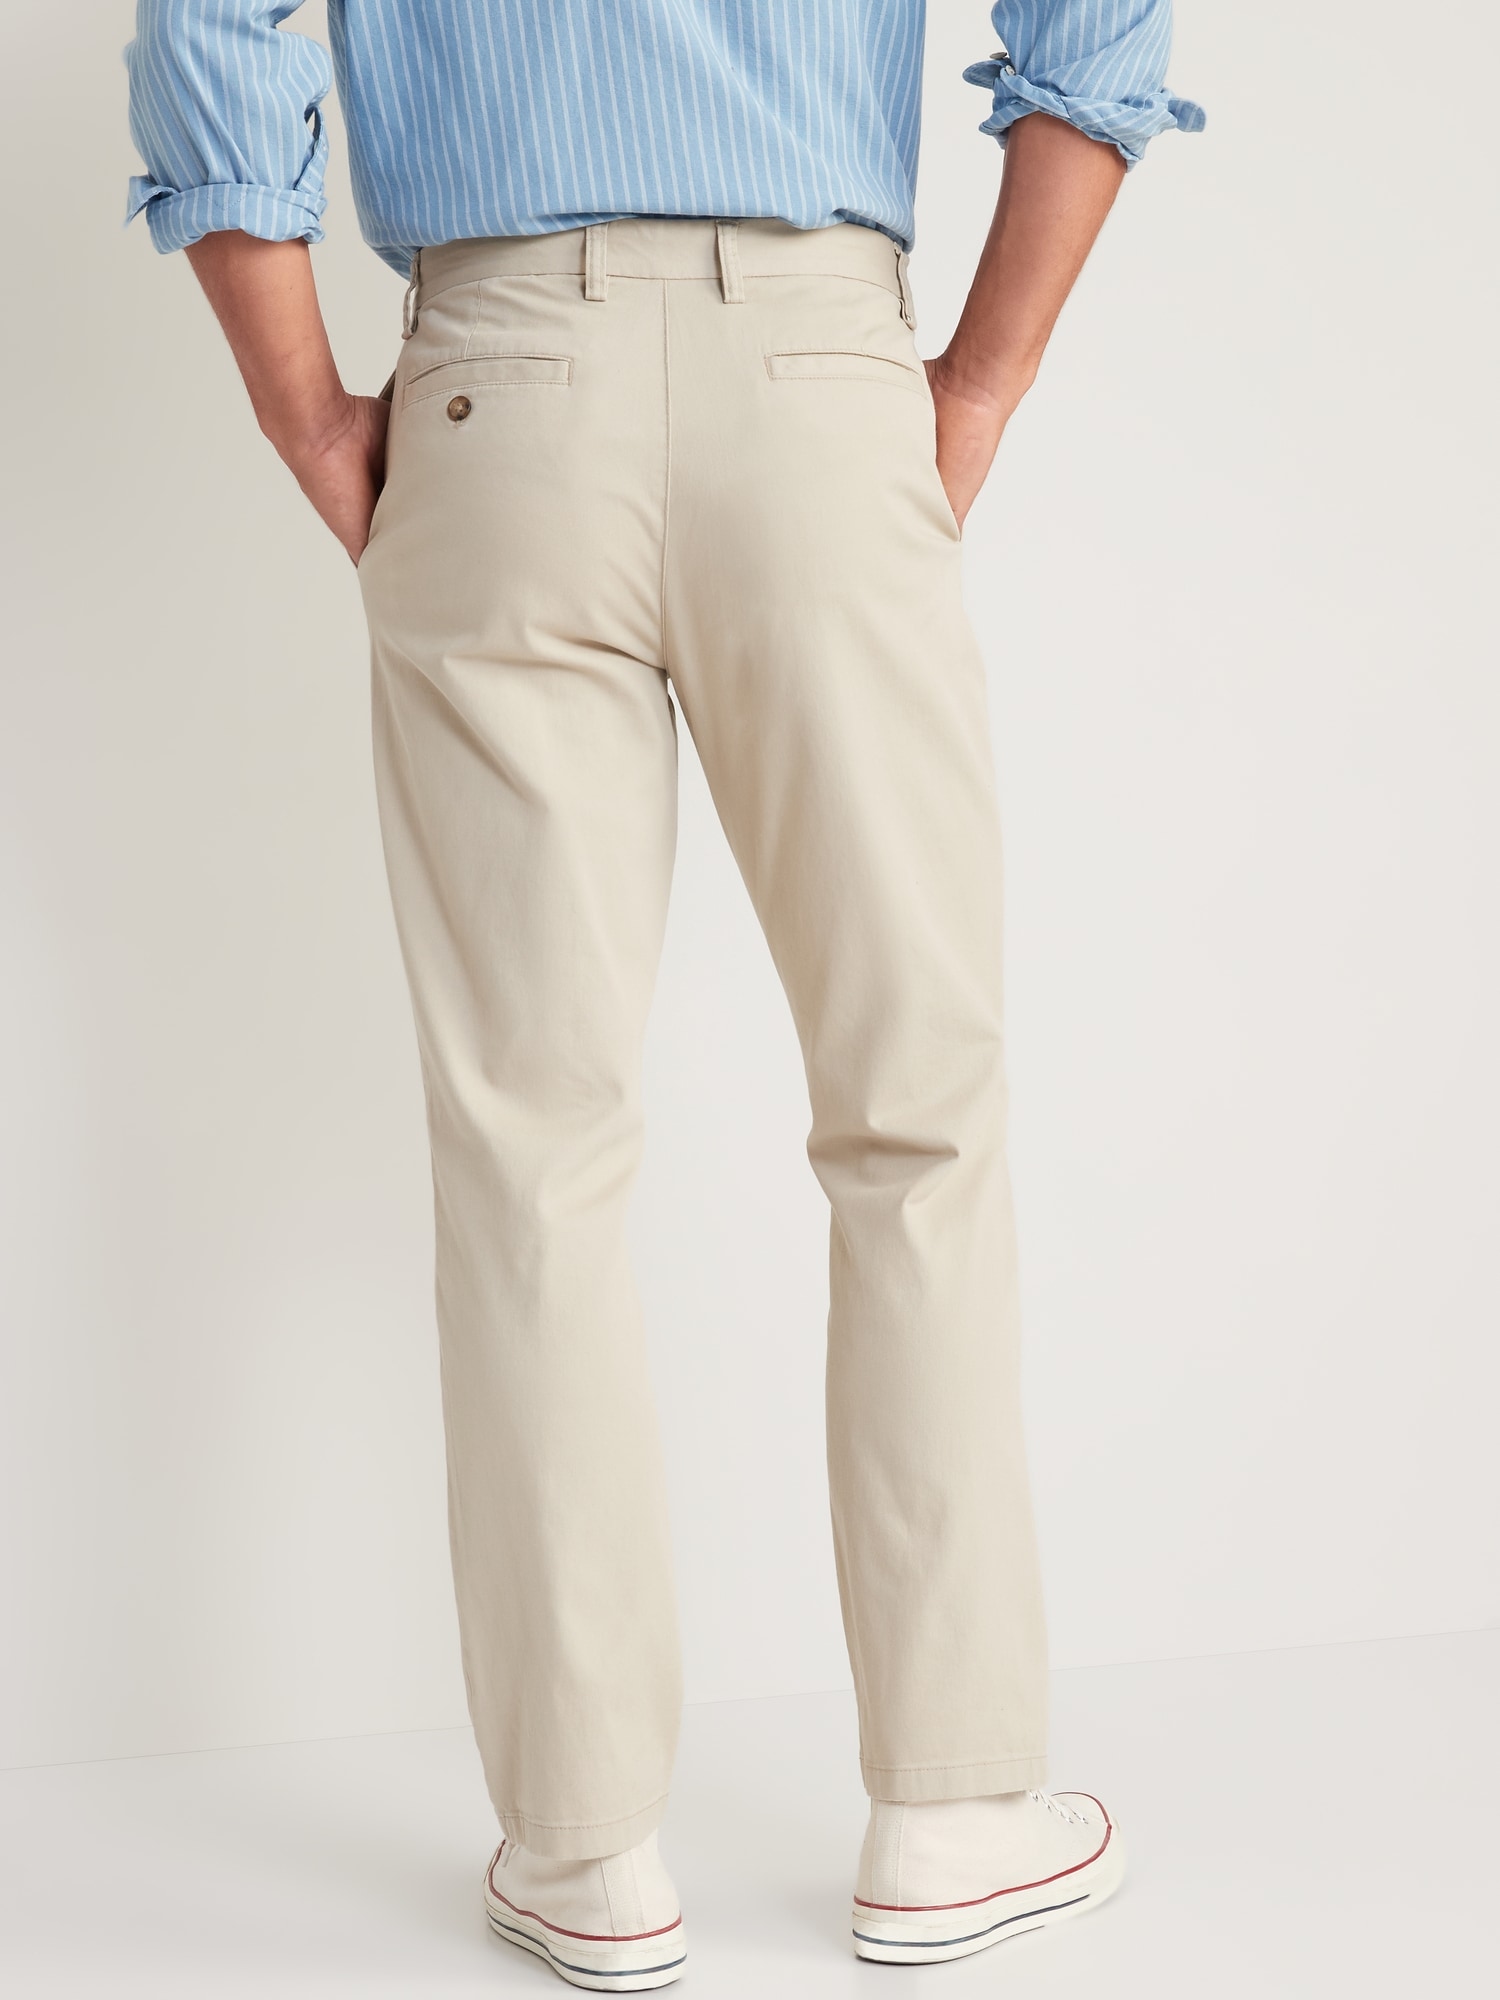 How to Style Chino Pants for Date Night  Diary of a Debutante